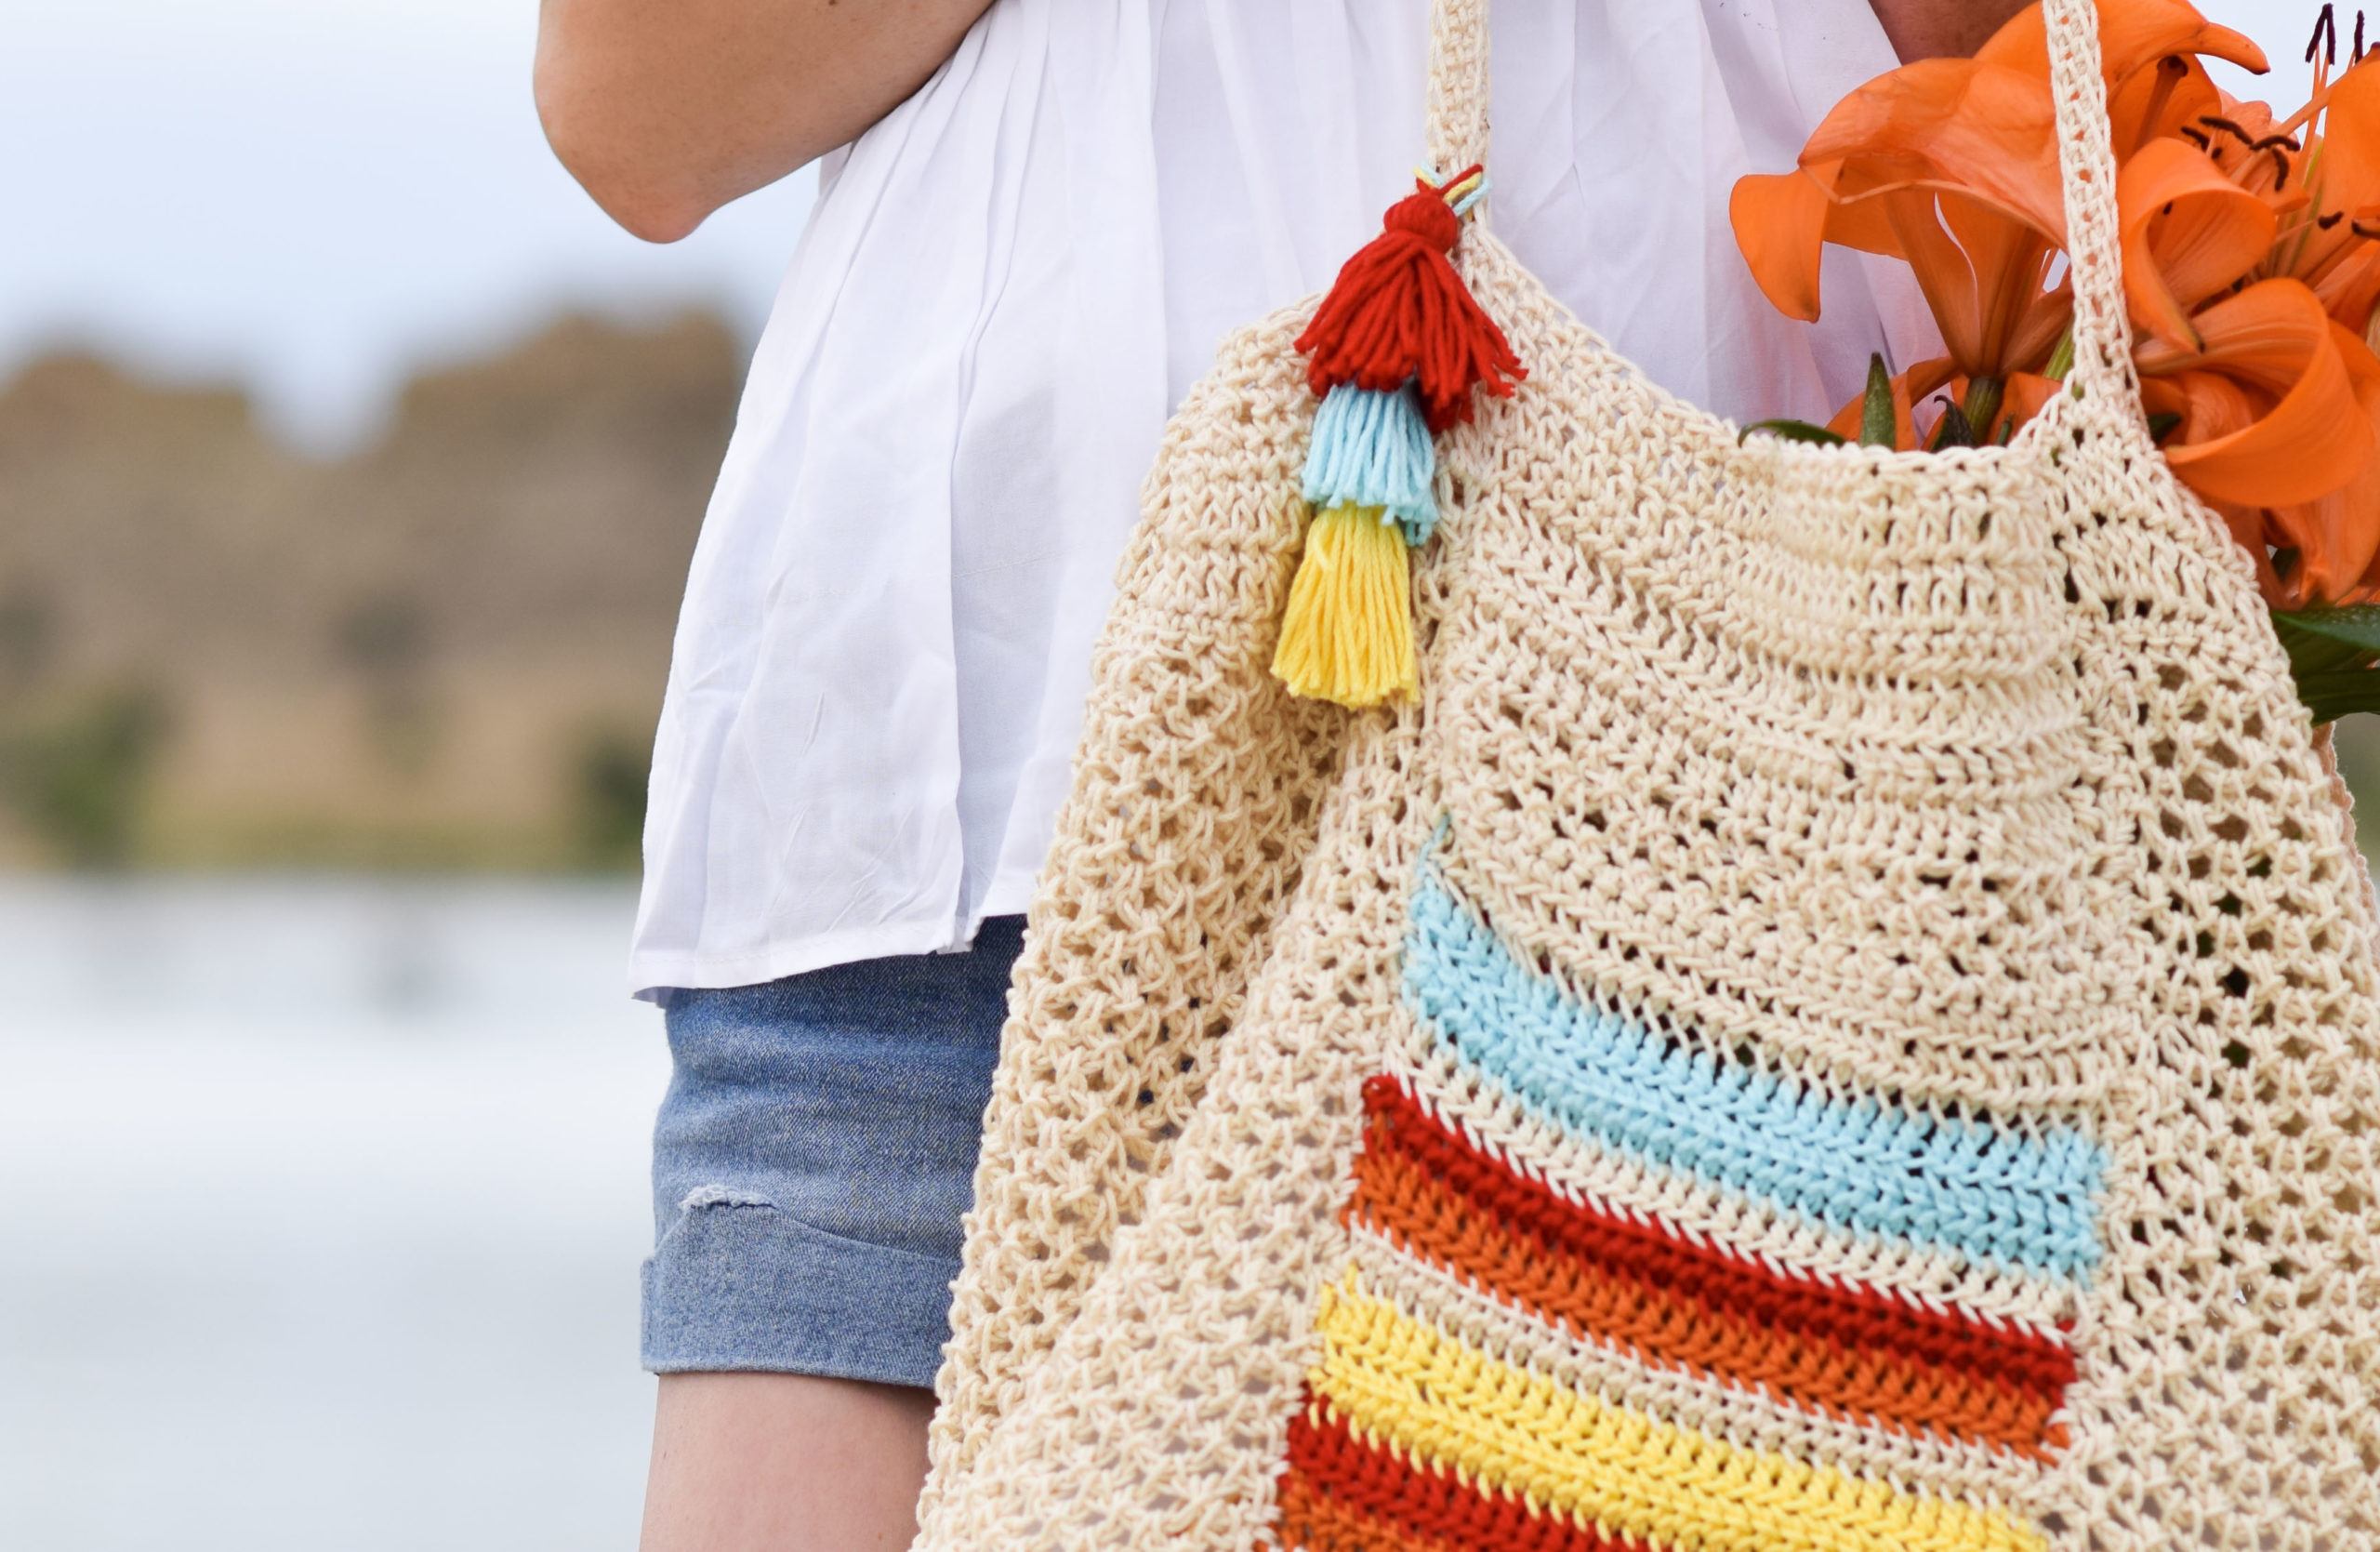 Easy Crochet & Knit Bag Patterns – Mama In A Stitch